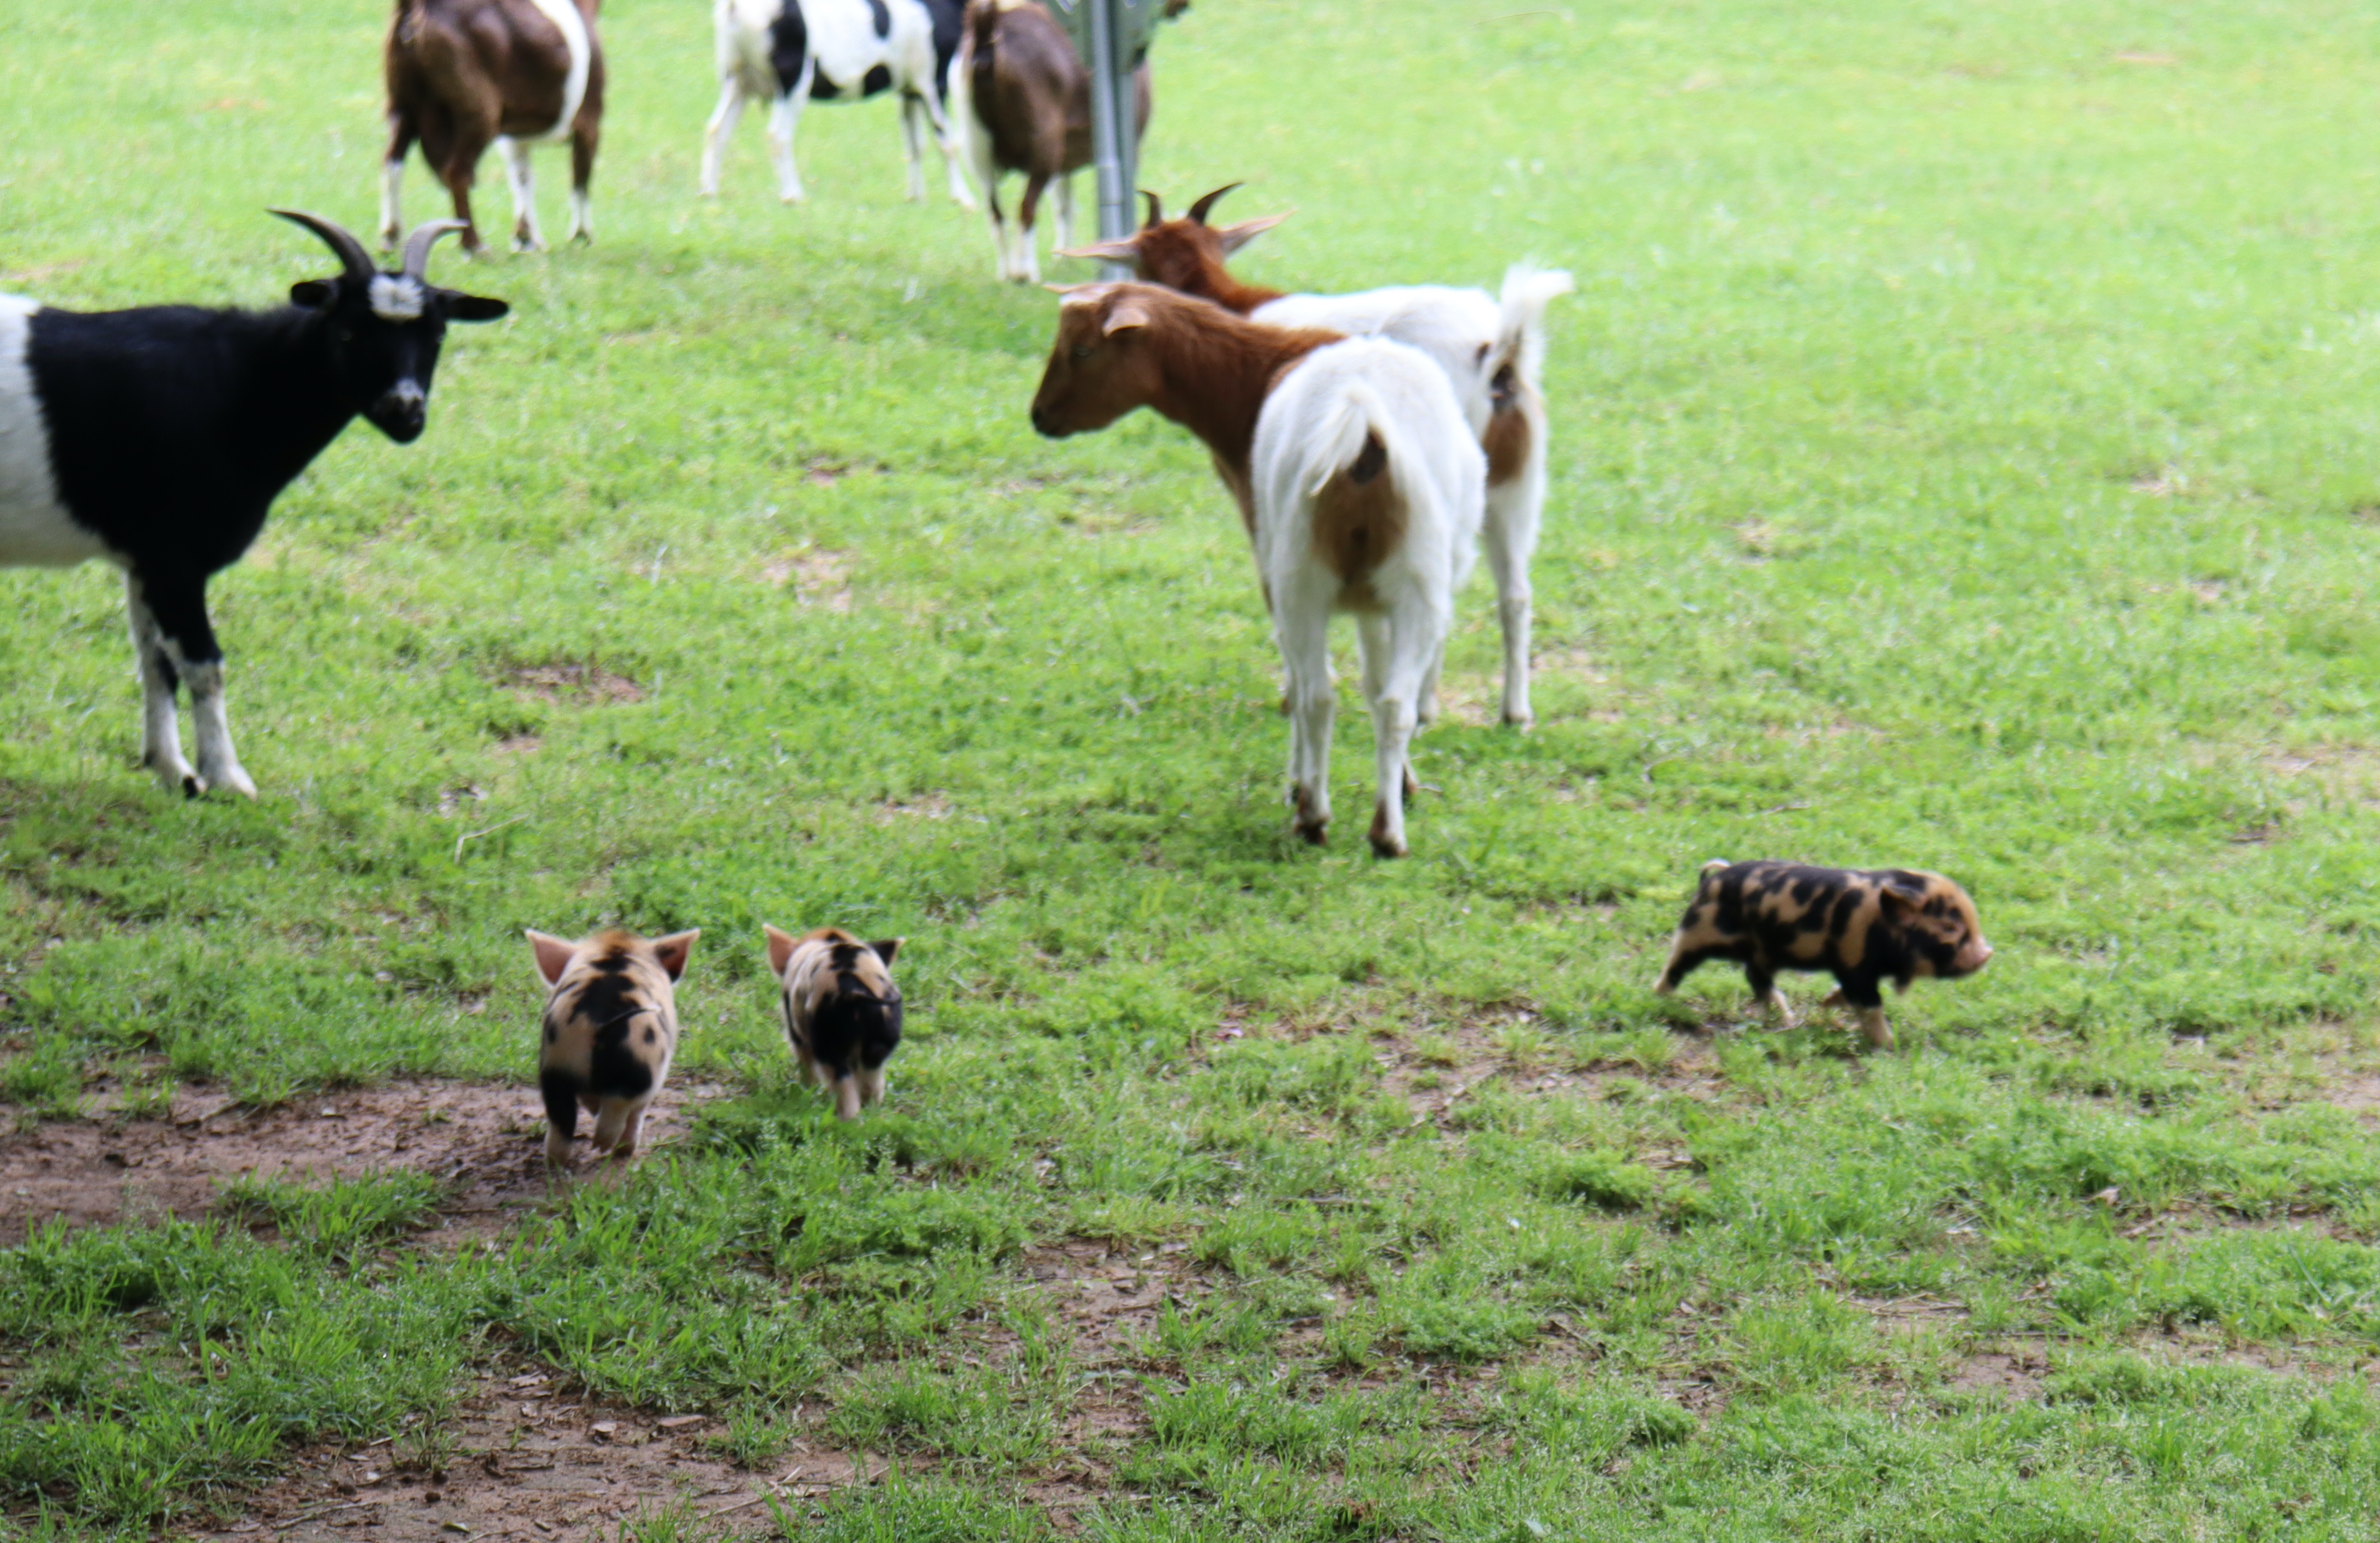 Goats and Piglets